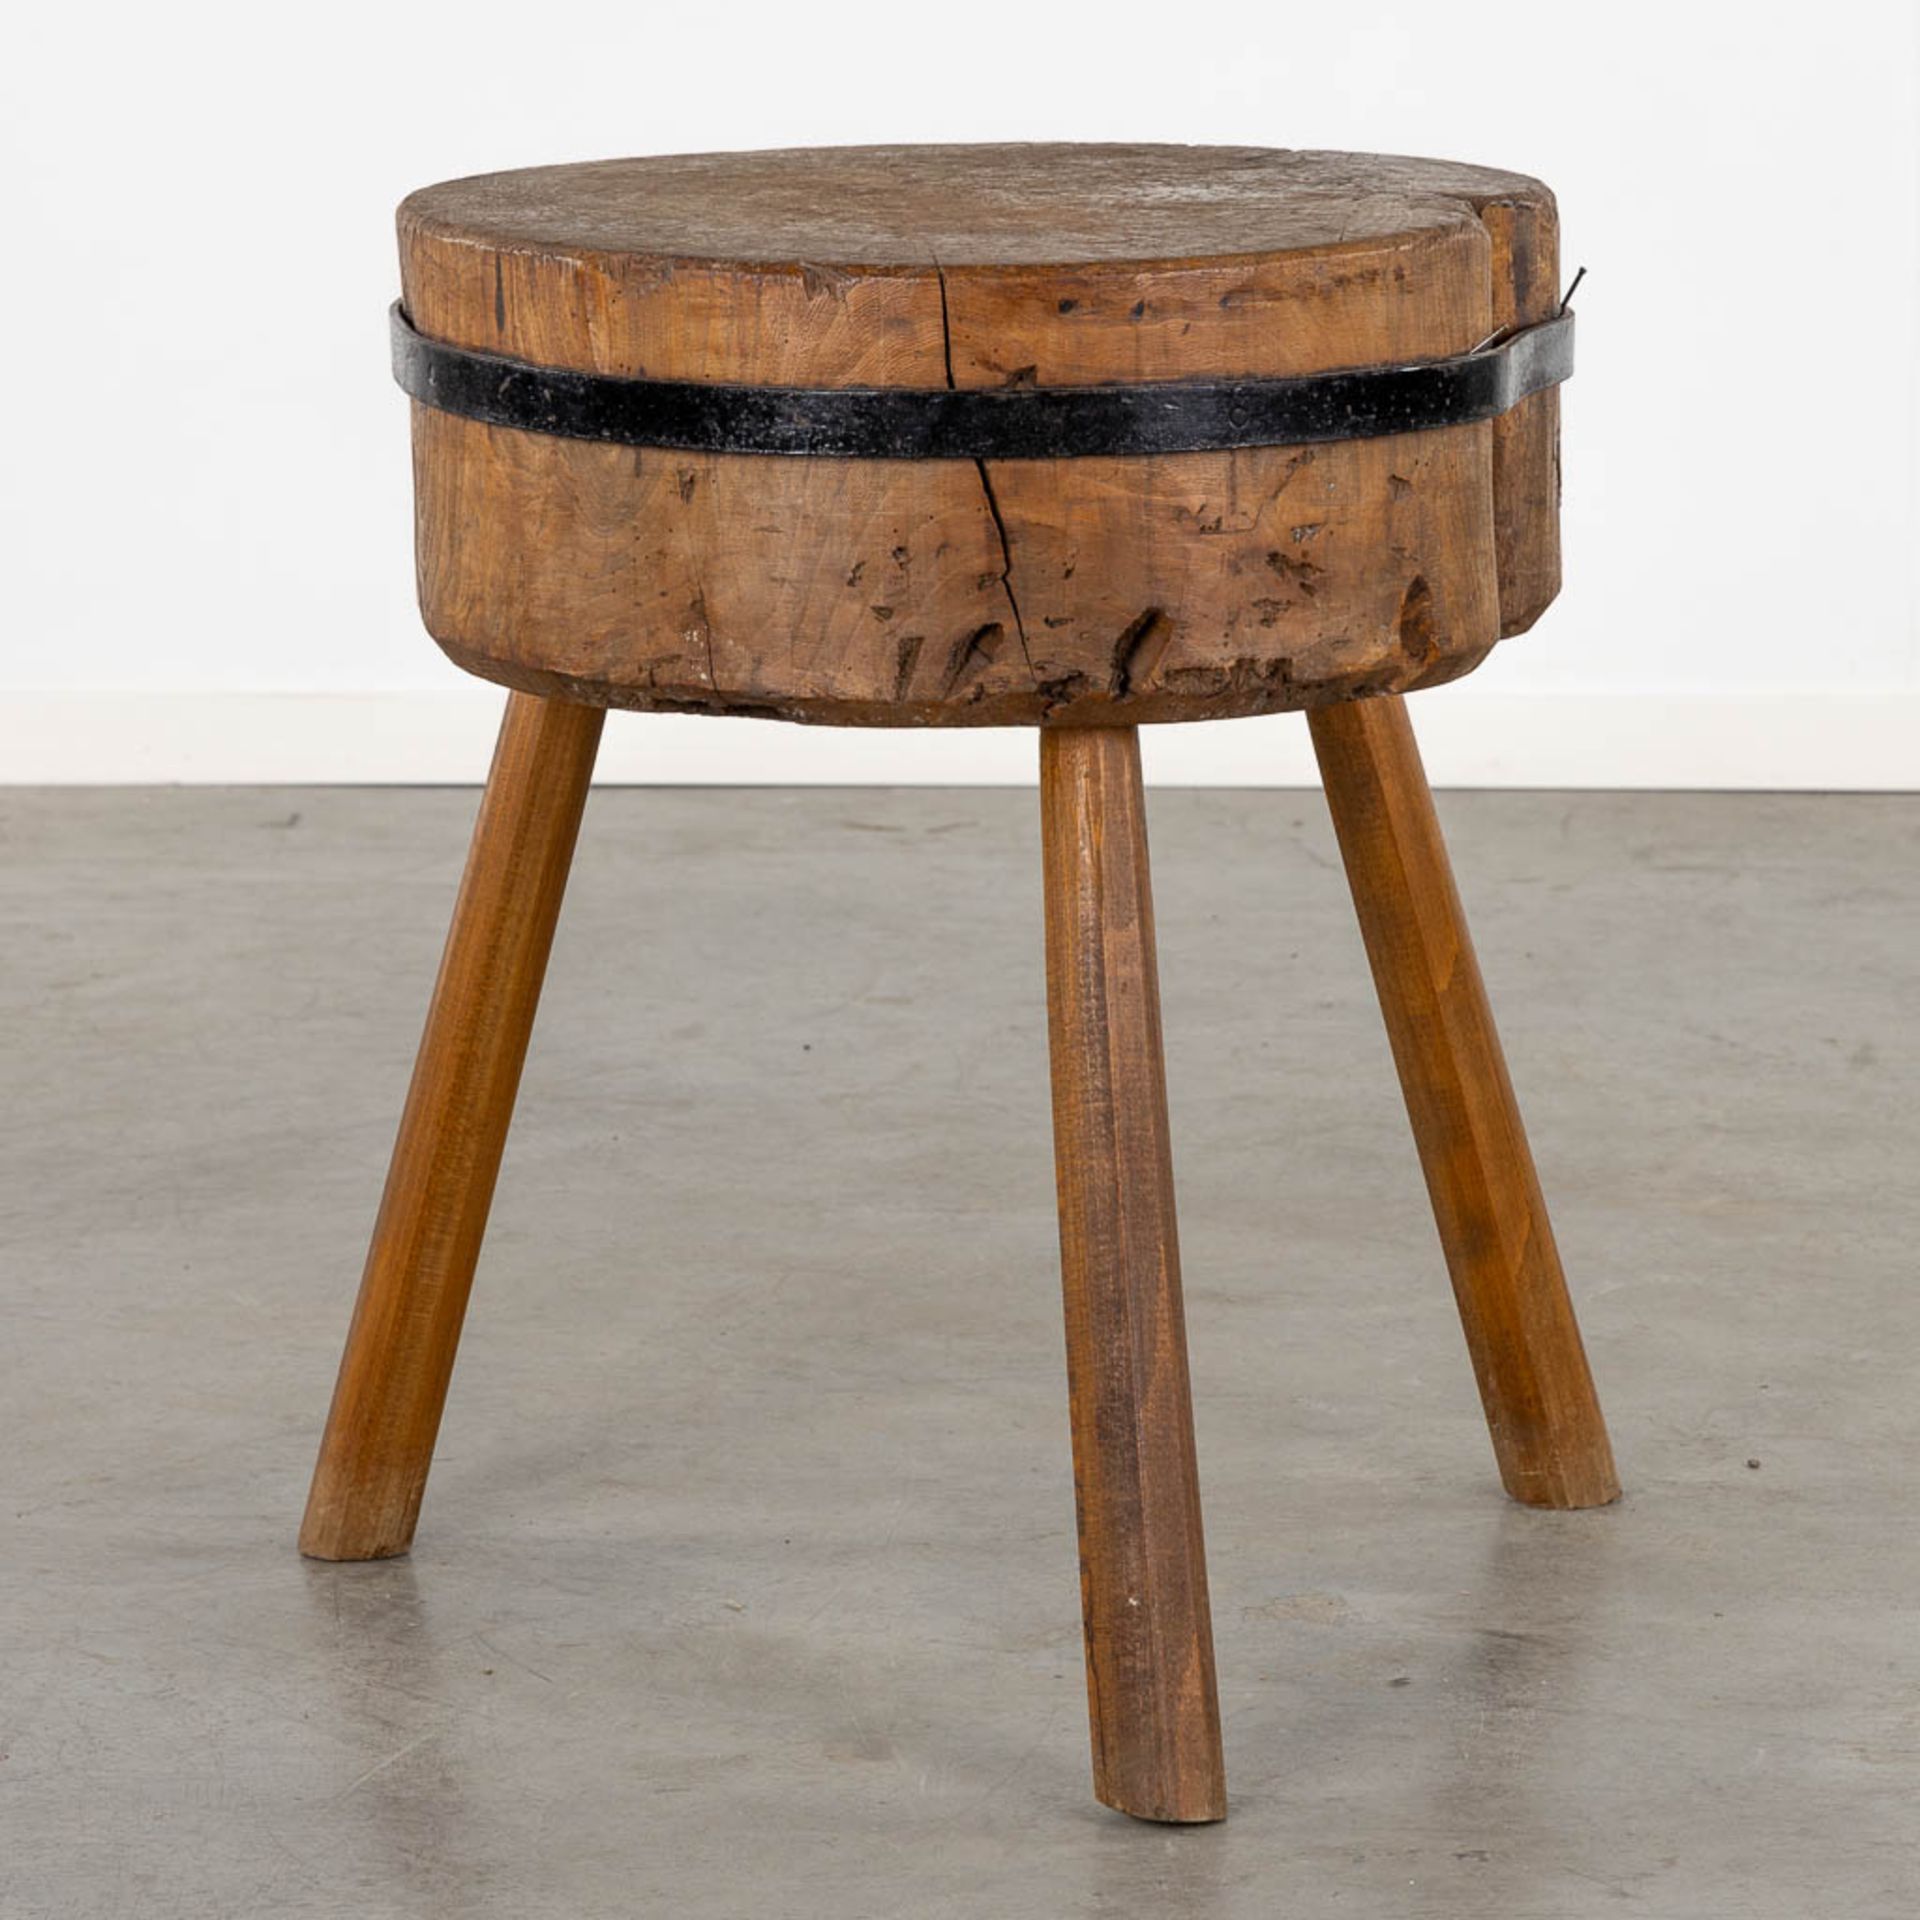 A small and antique 'Butcher's block', standing on three legs. (H:68 x D:56 cm) - Image 3 of 8